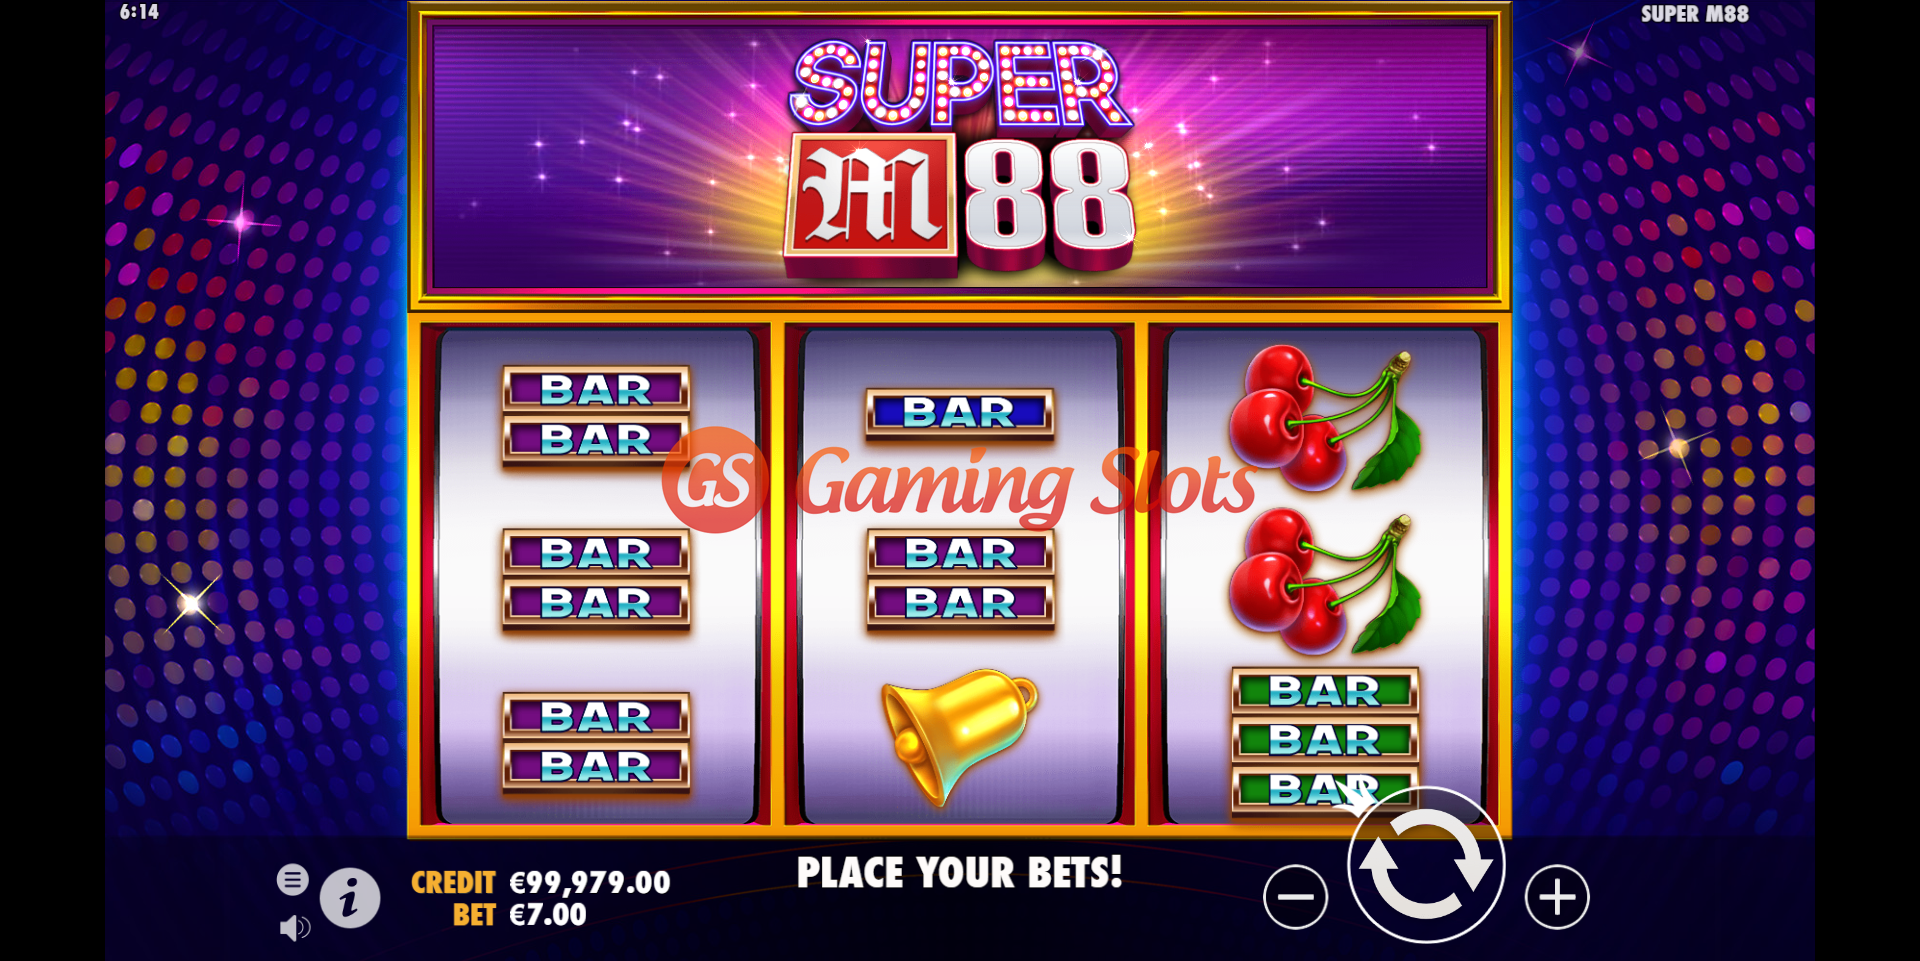 Base Game for Super M88 slot from Pragmatic Play